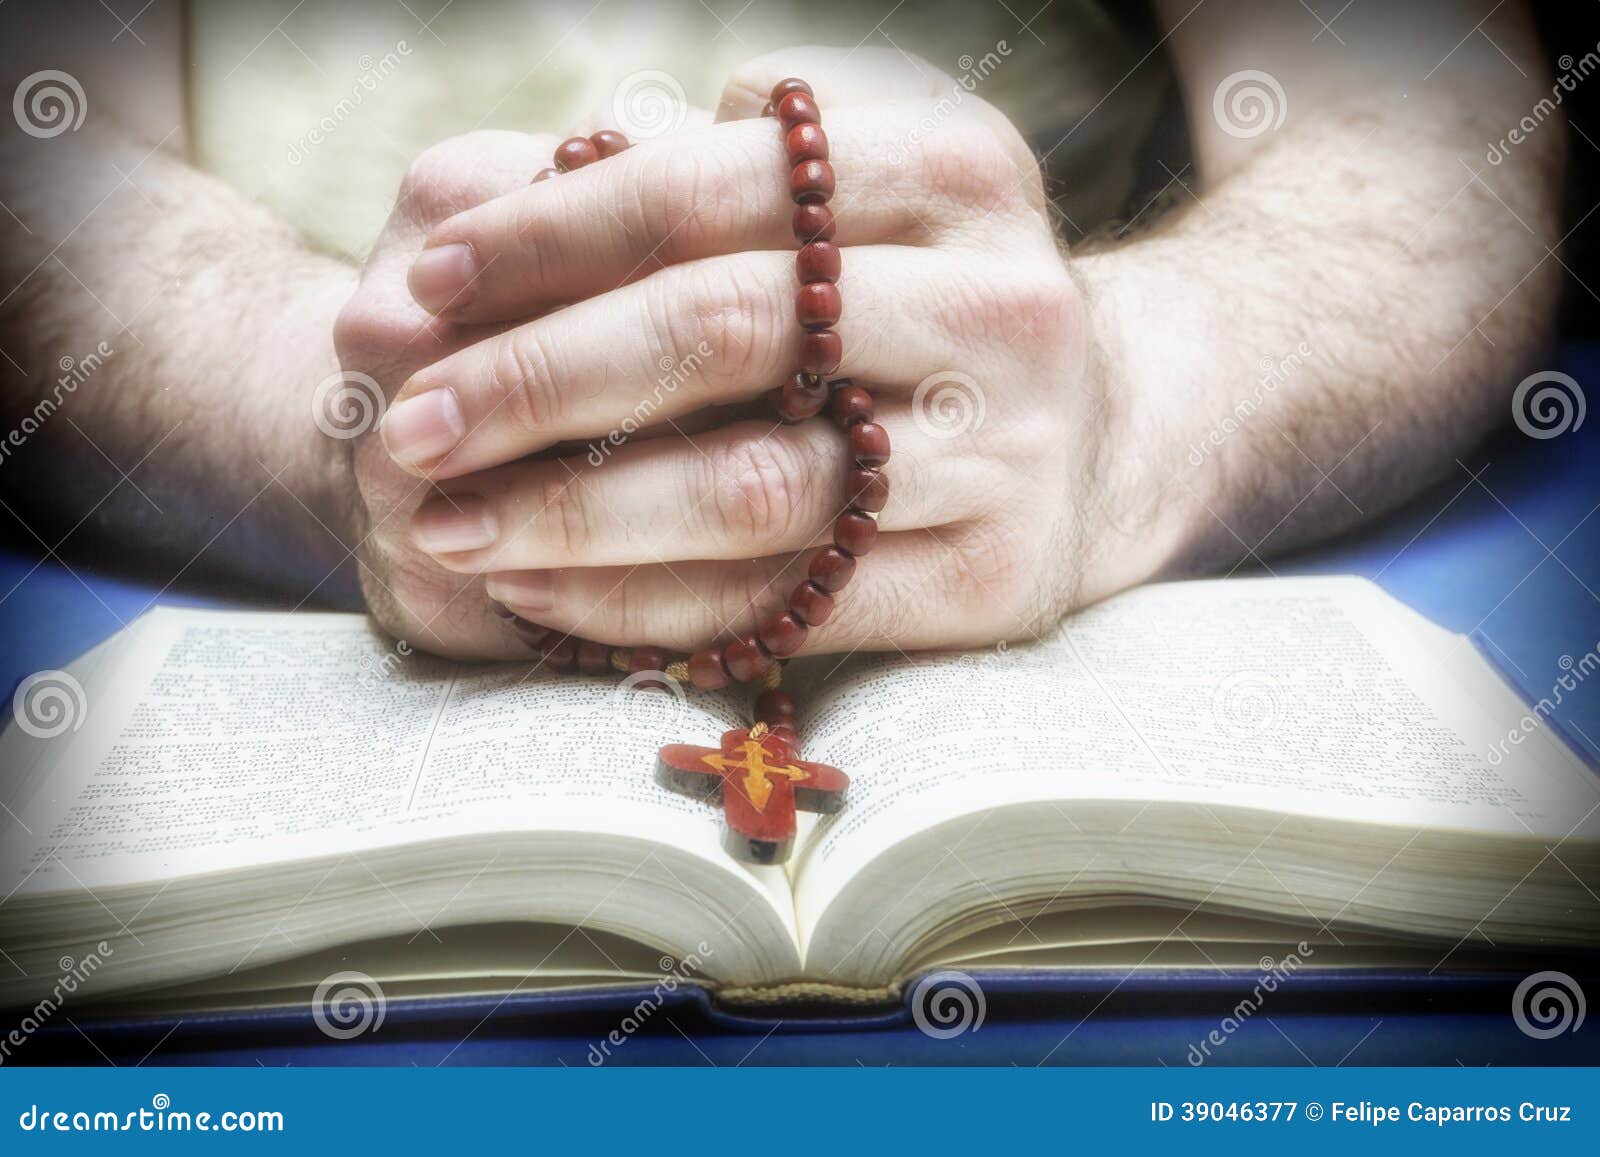 christian believer praying to god with rosary